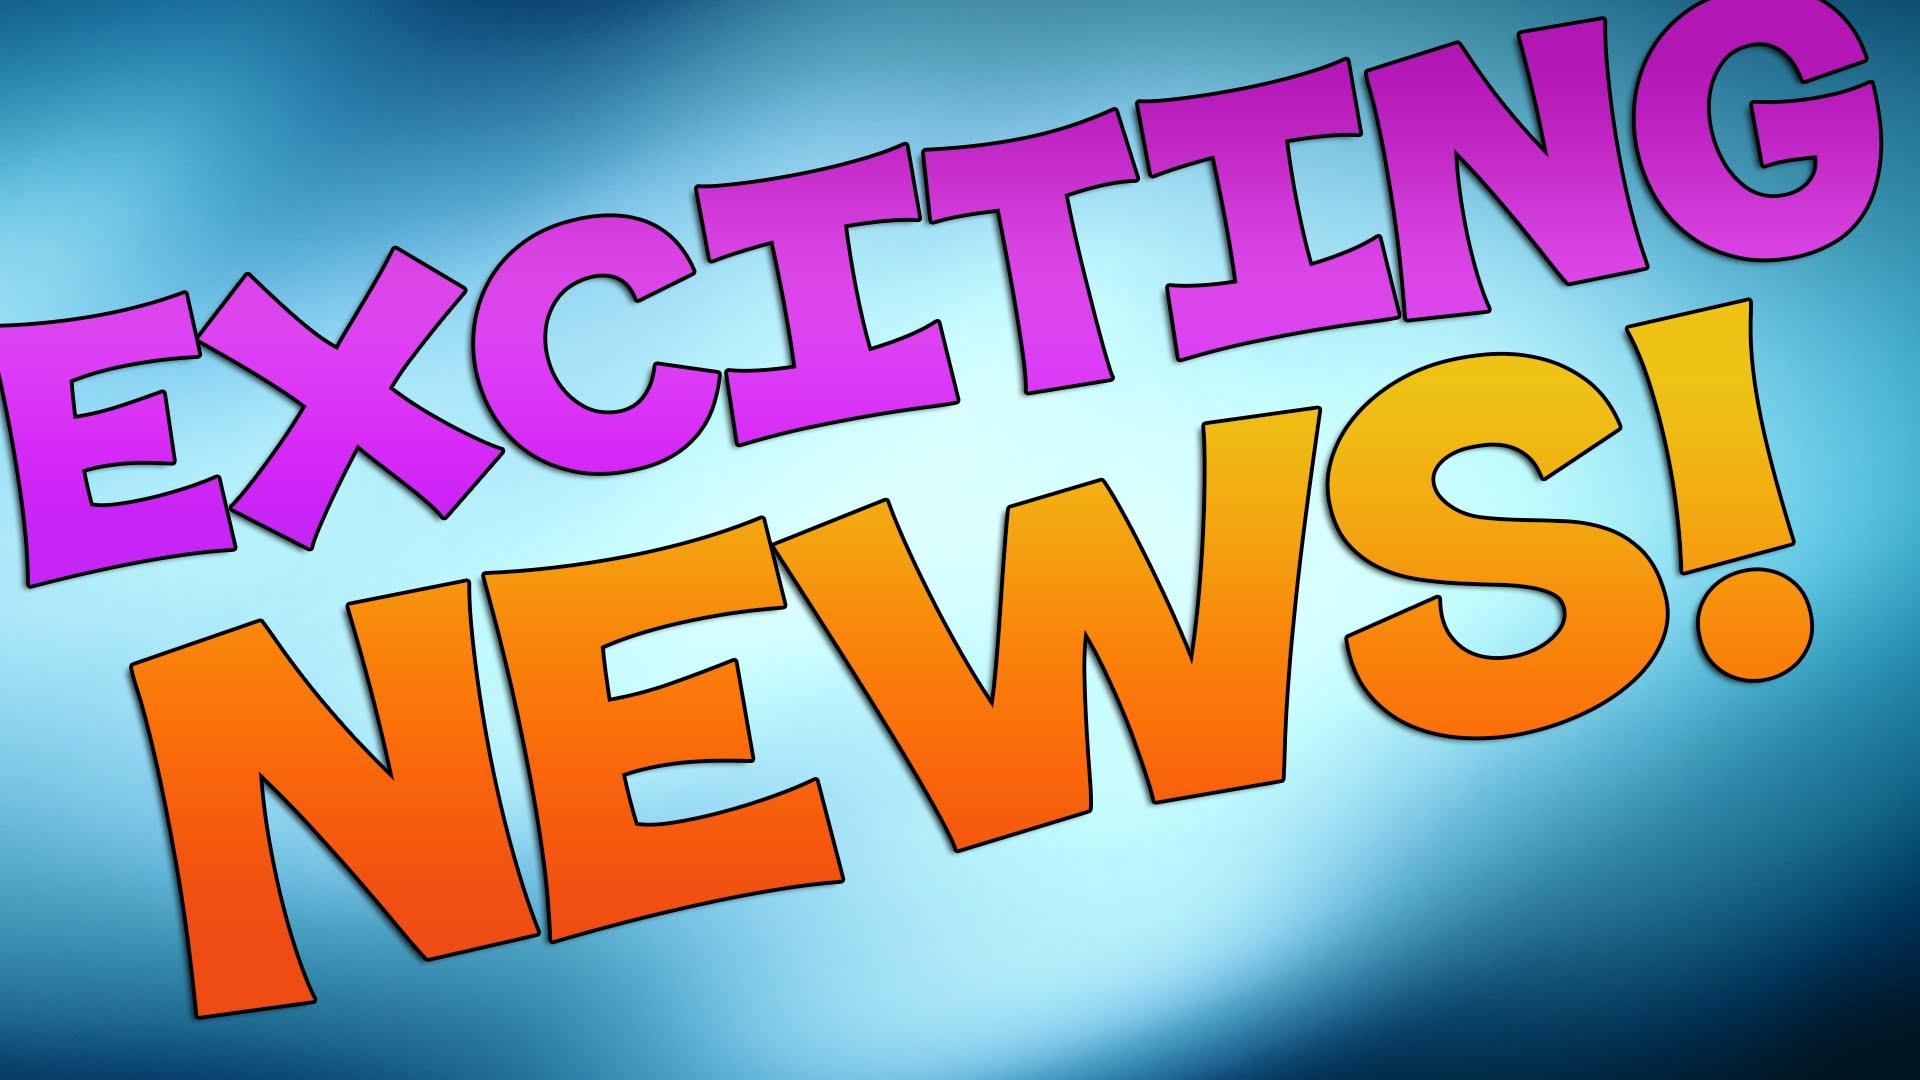 newsletter clipart exciting news